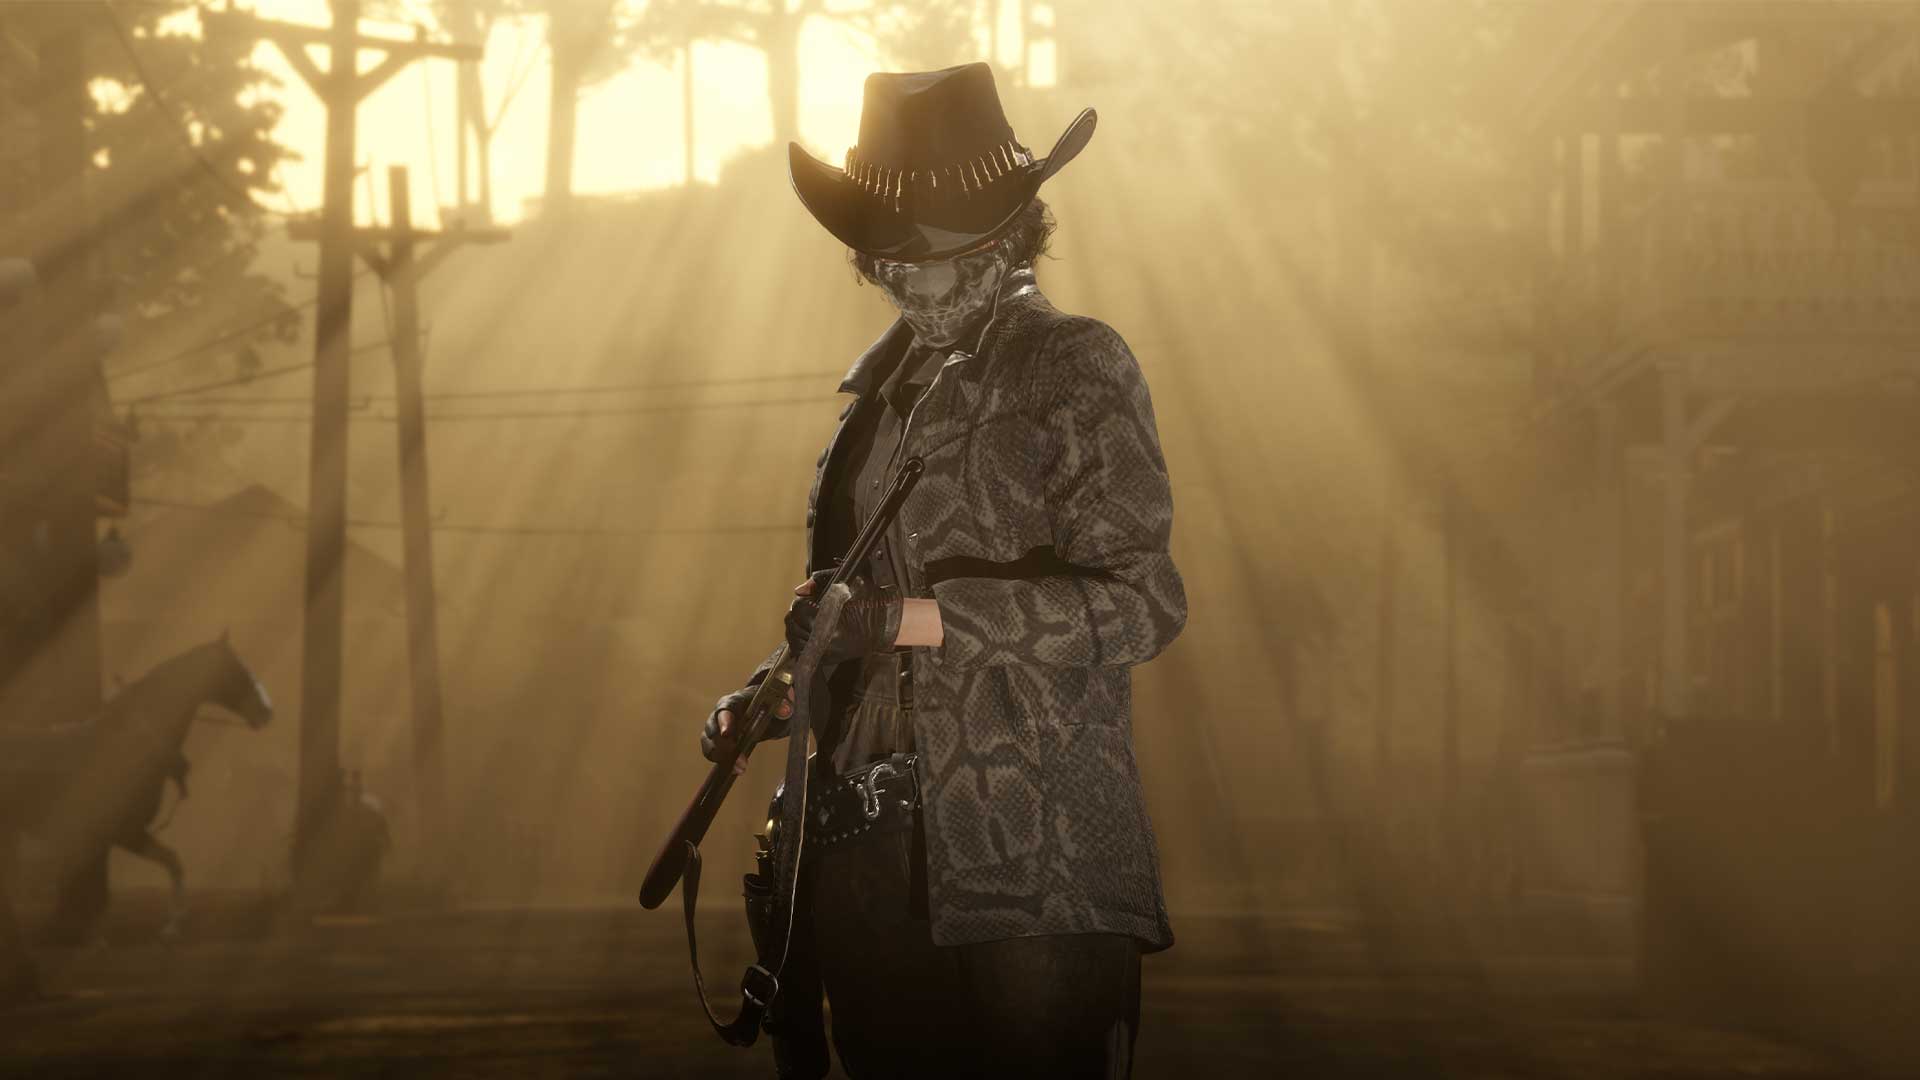 Dead Redemption 2 cut revealed datamine |